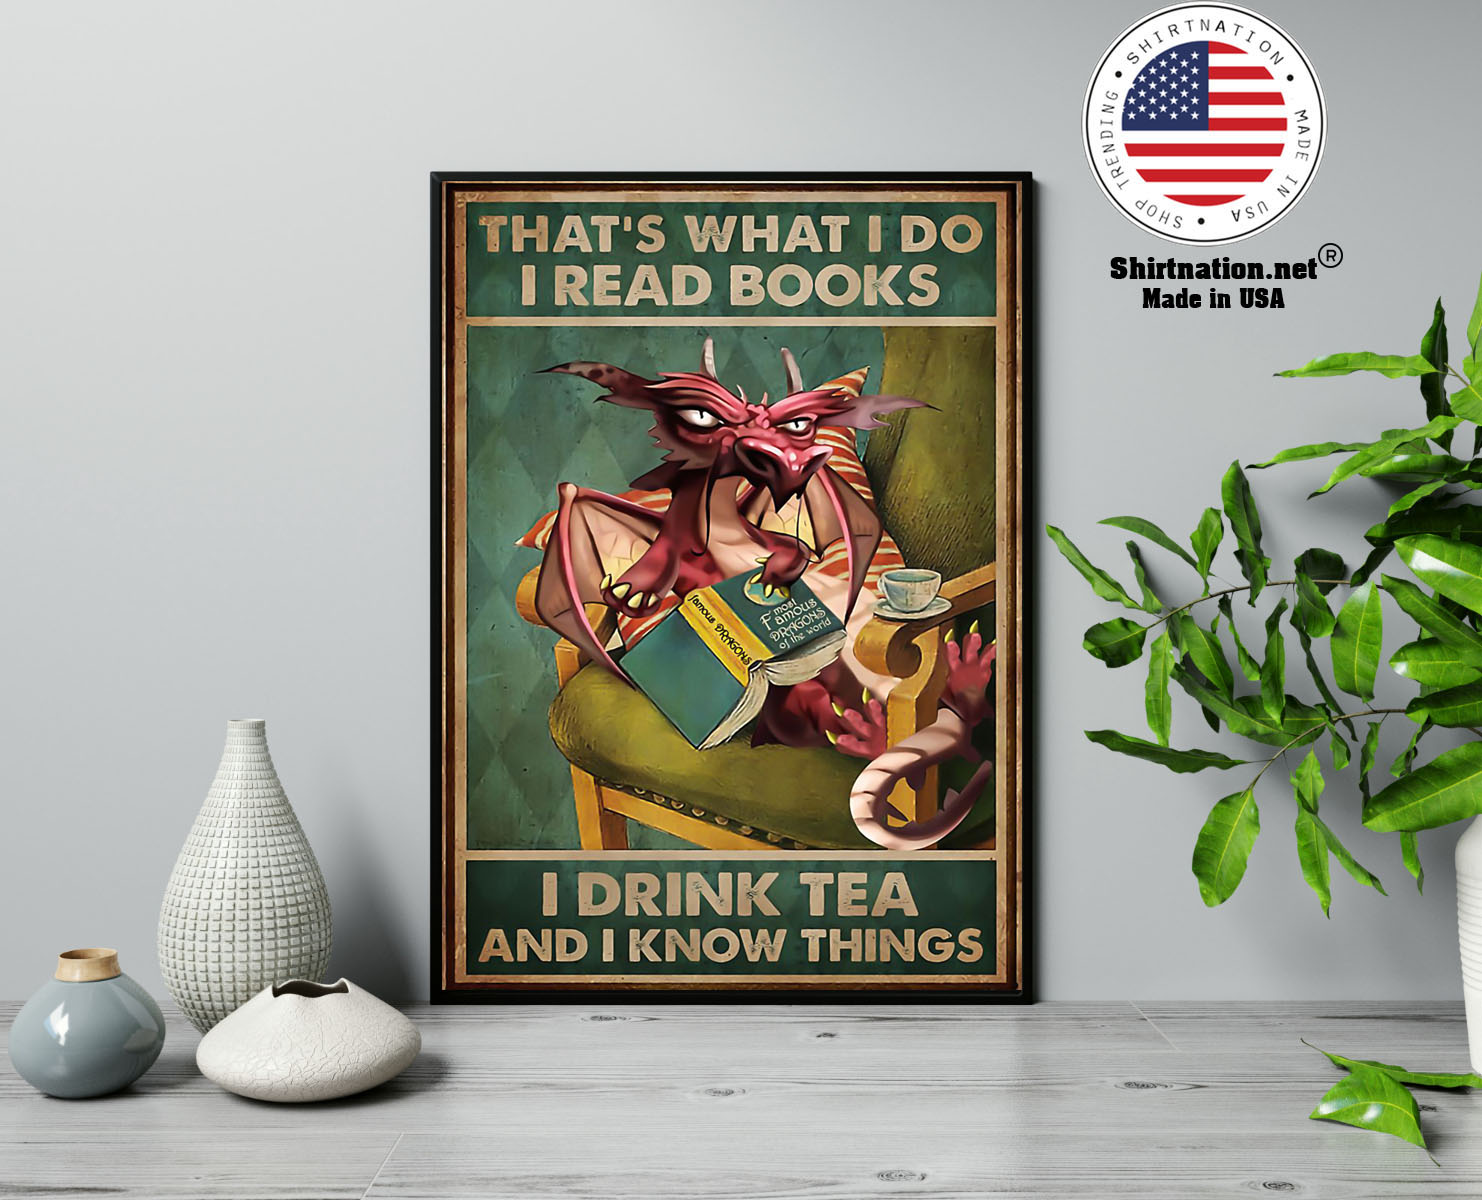 Dragon Thats what I do I read books I drink tea and i know things poster 13